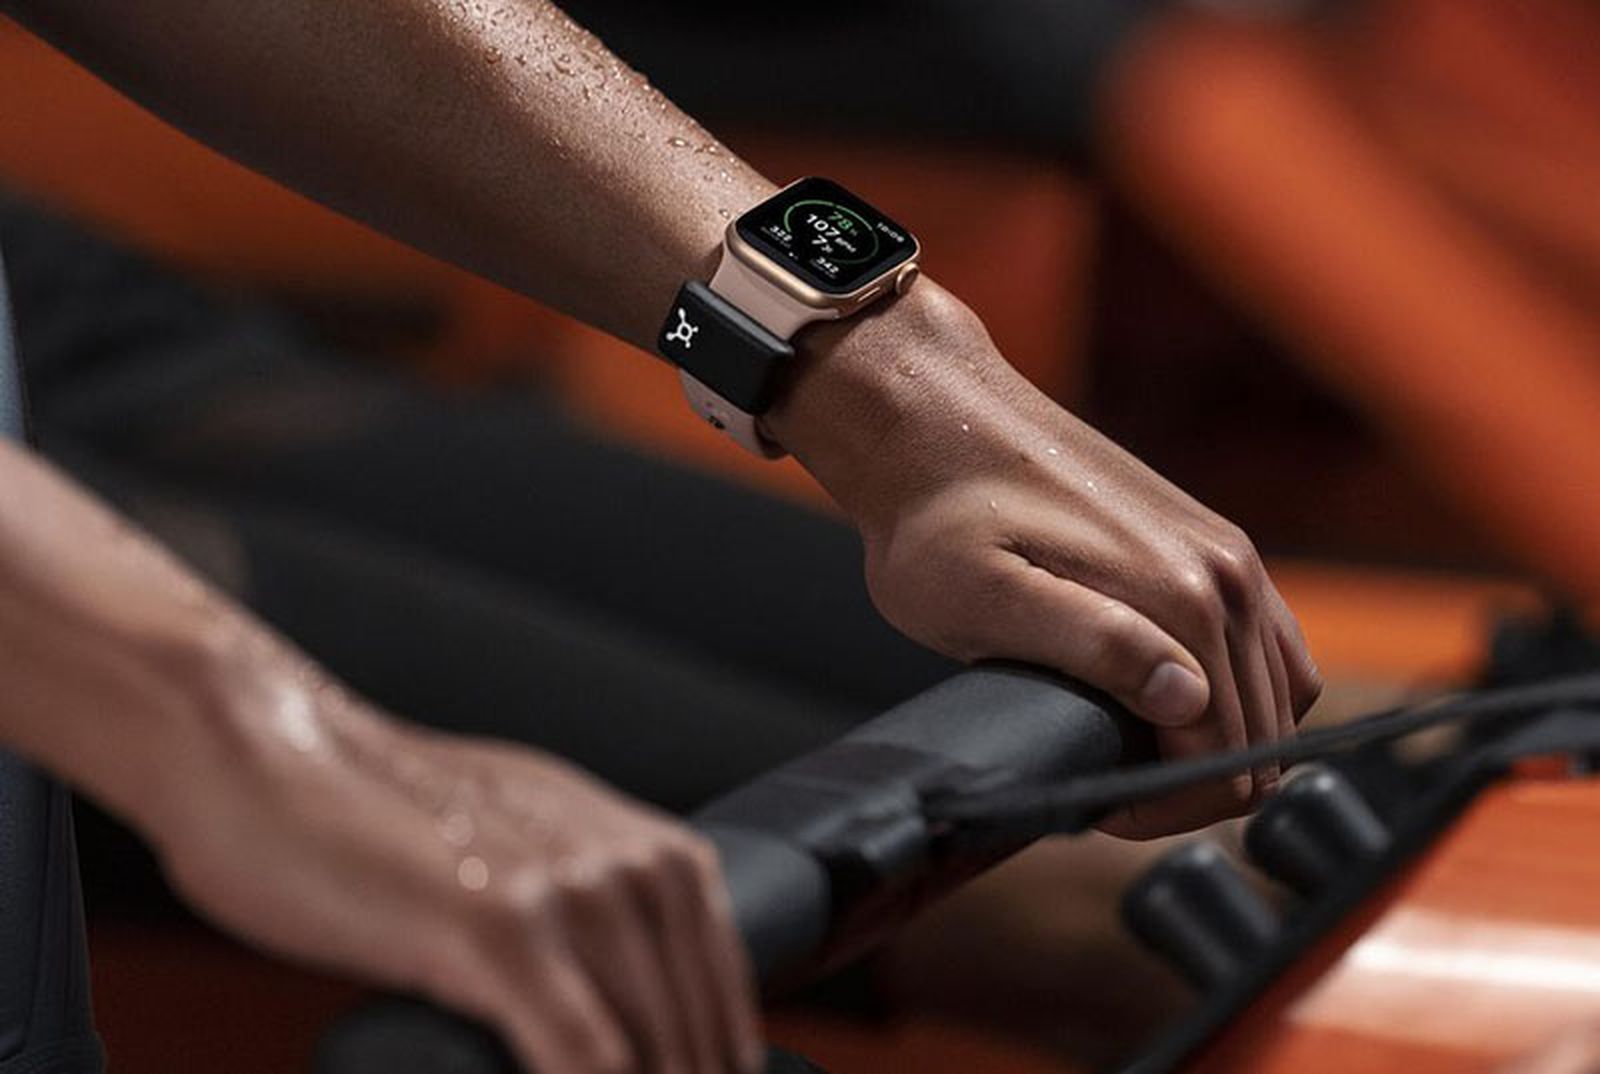 Apple Watch Connected' Program Will Offer Rewards for Working Out at  Participating Gyms - MacRumors